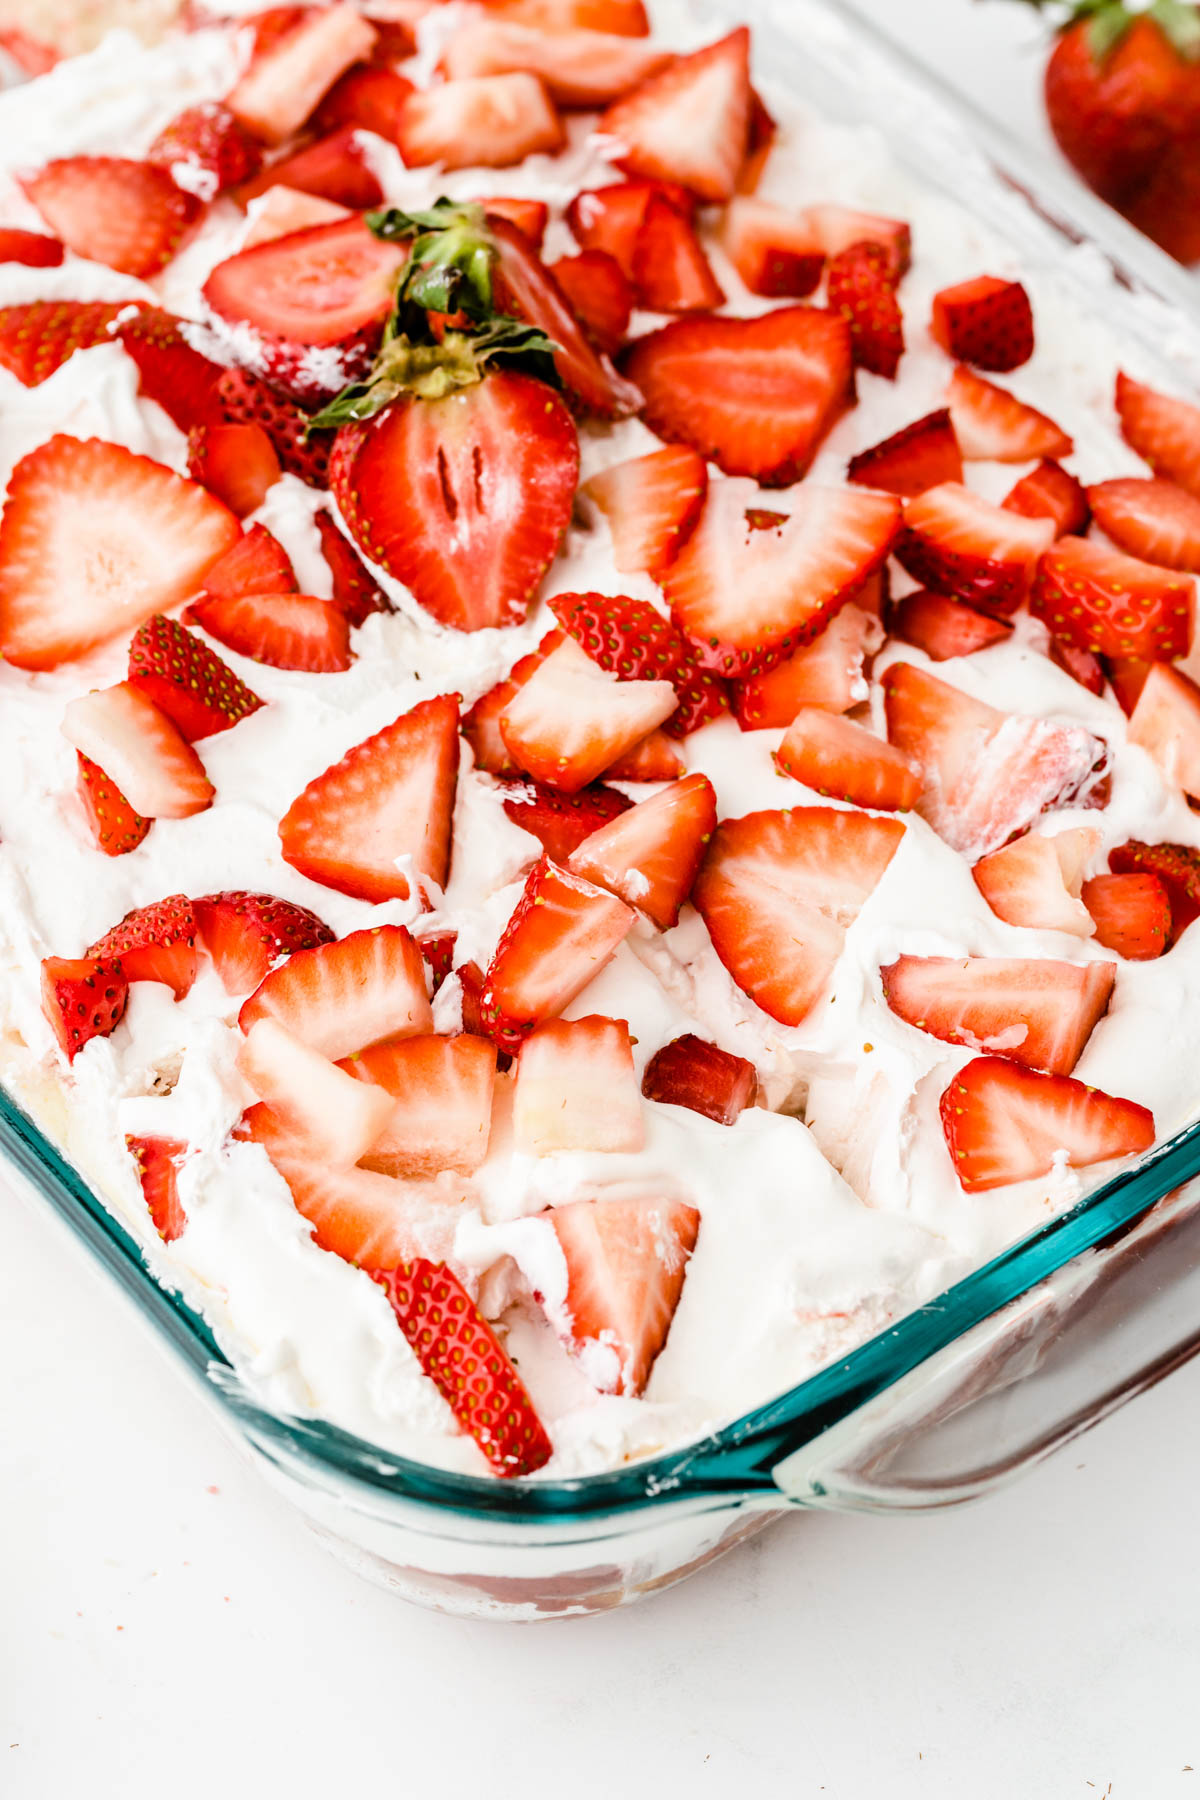 A glass dish filled with a dessert topped with whipped cream and fresh strawberry slices.